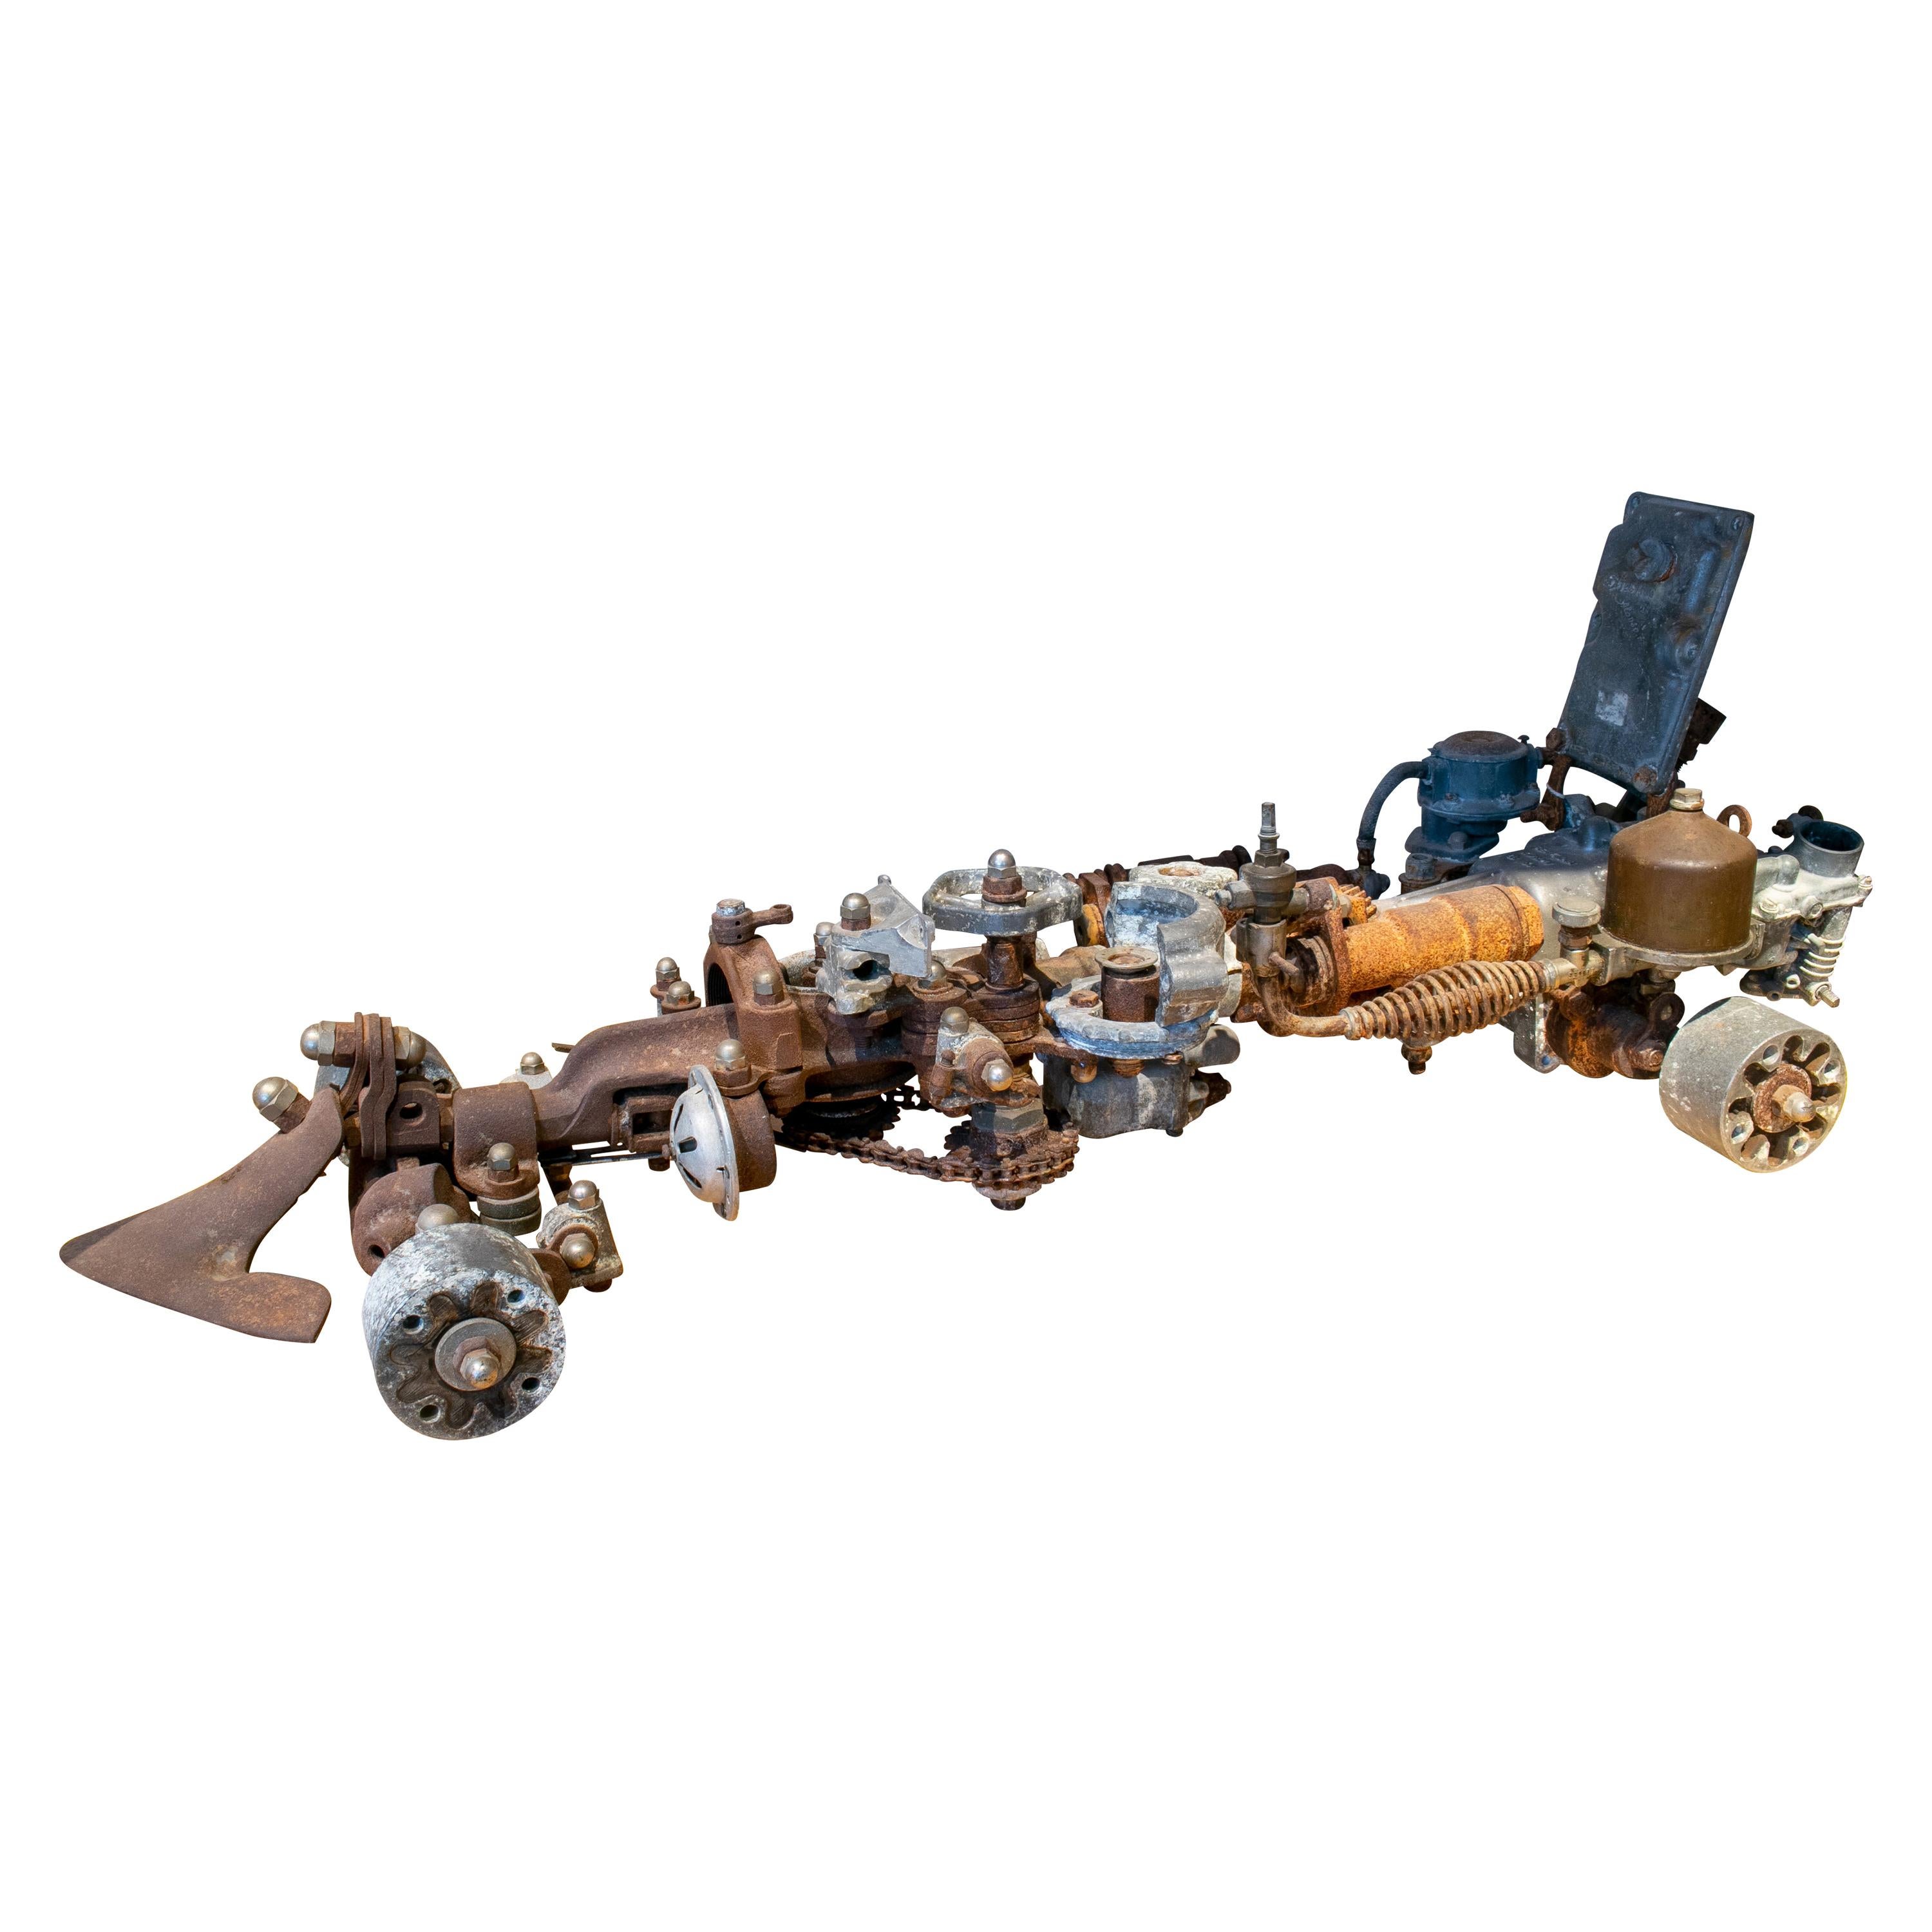 1970s Formula 1 Car Sculpture Made with Assorted Old Mechanical Metal Pieces